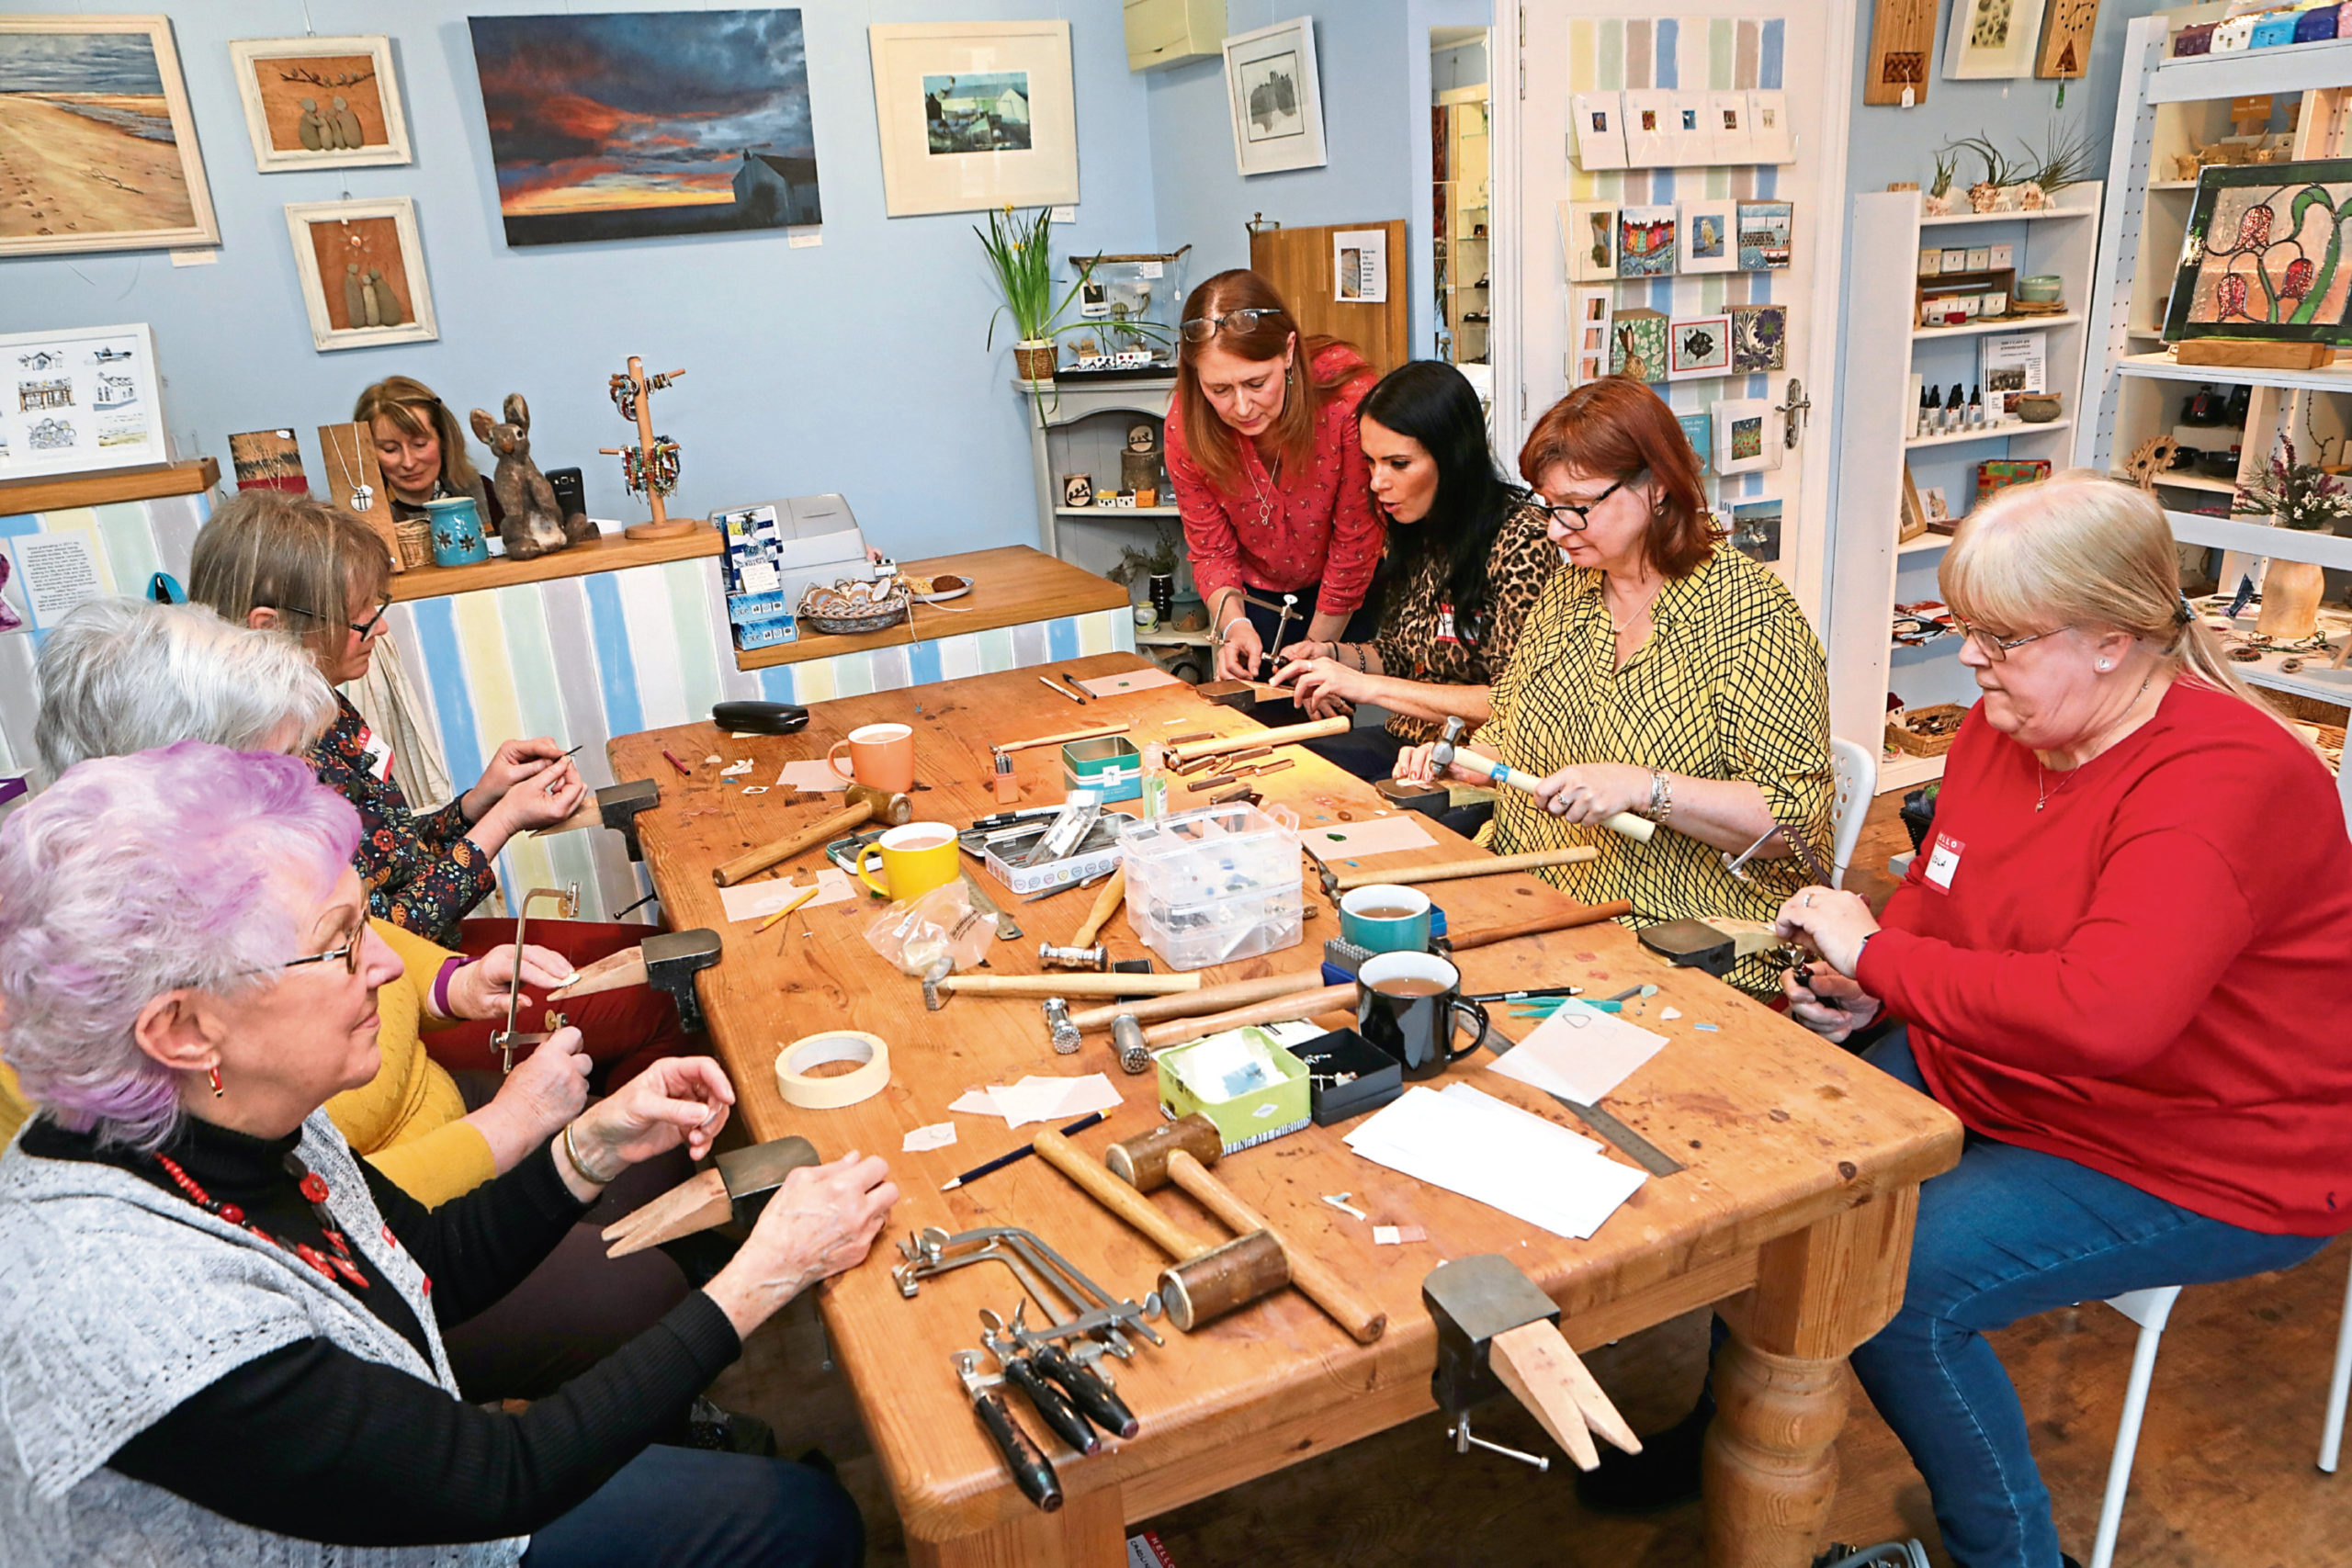 The beach glass pendant workshop in action - before the coronavirus outbreak.